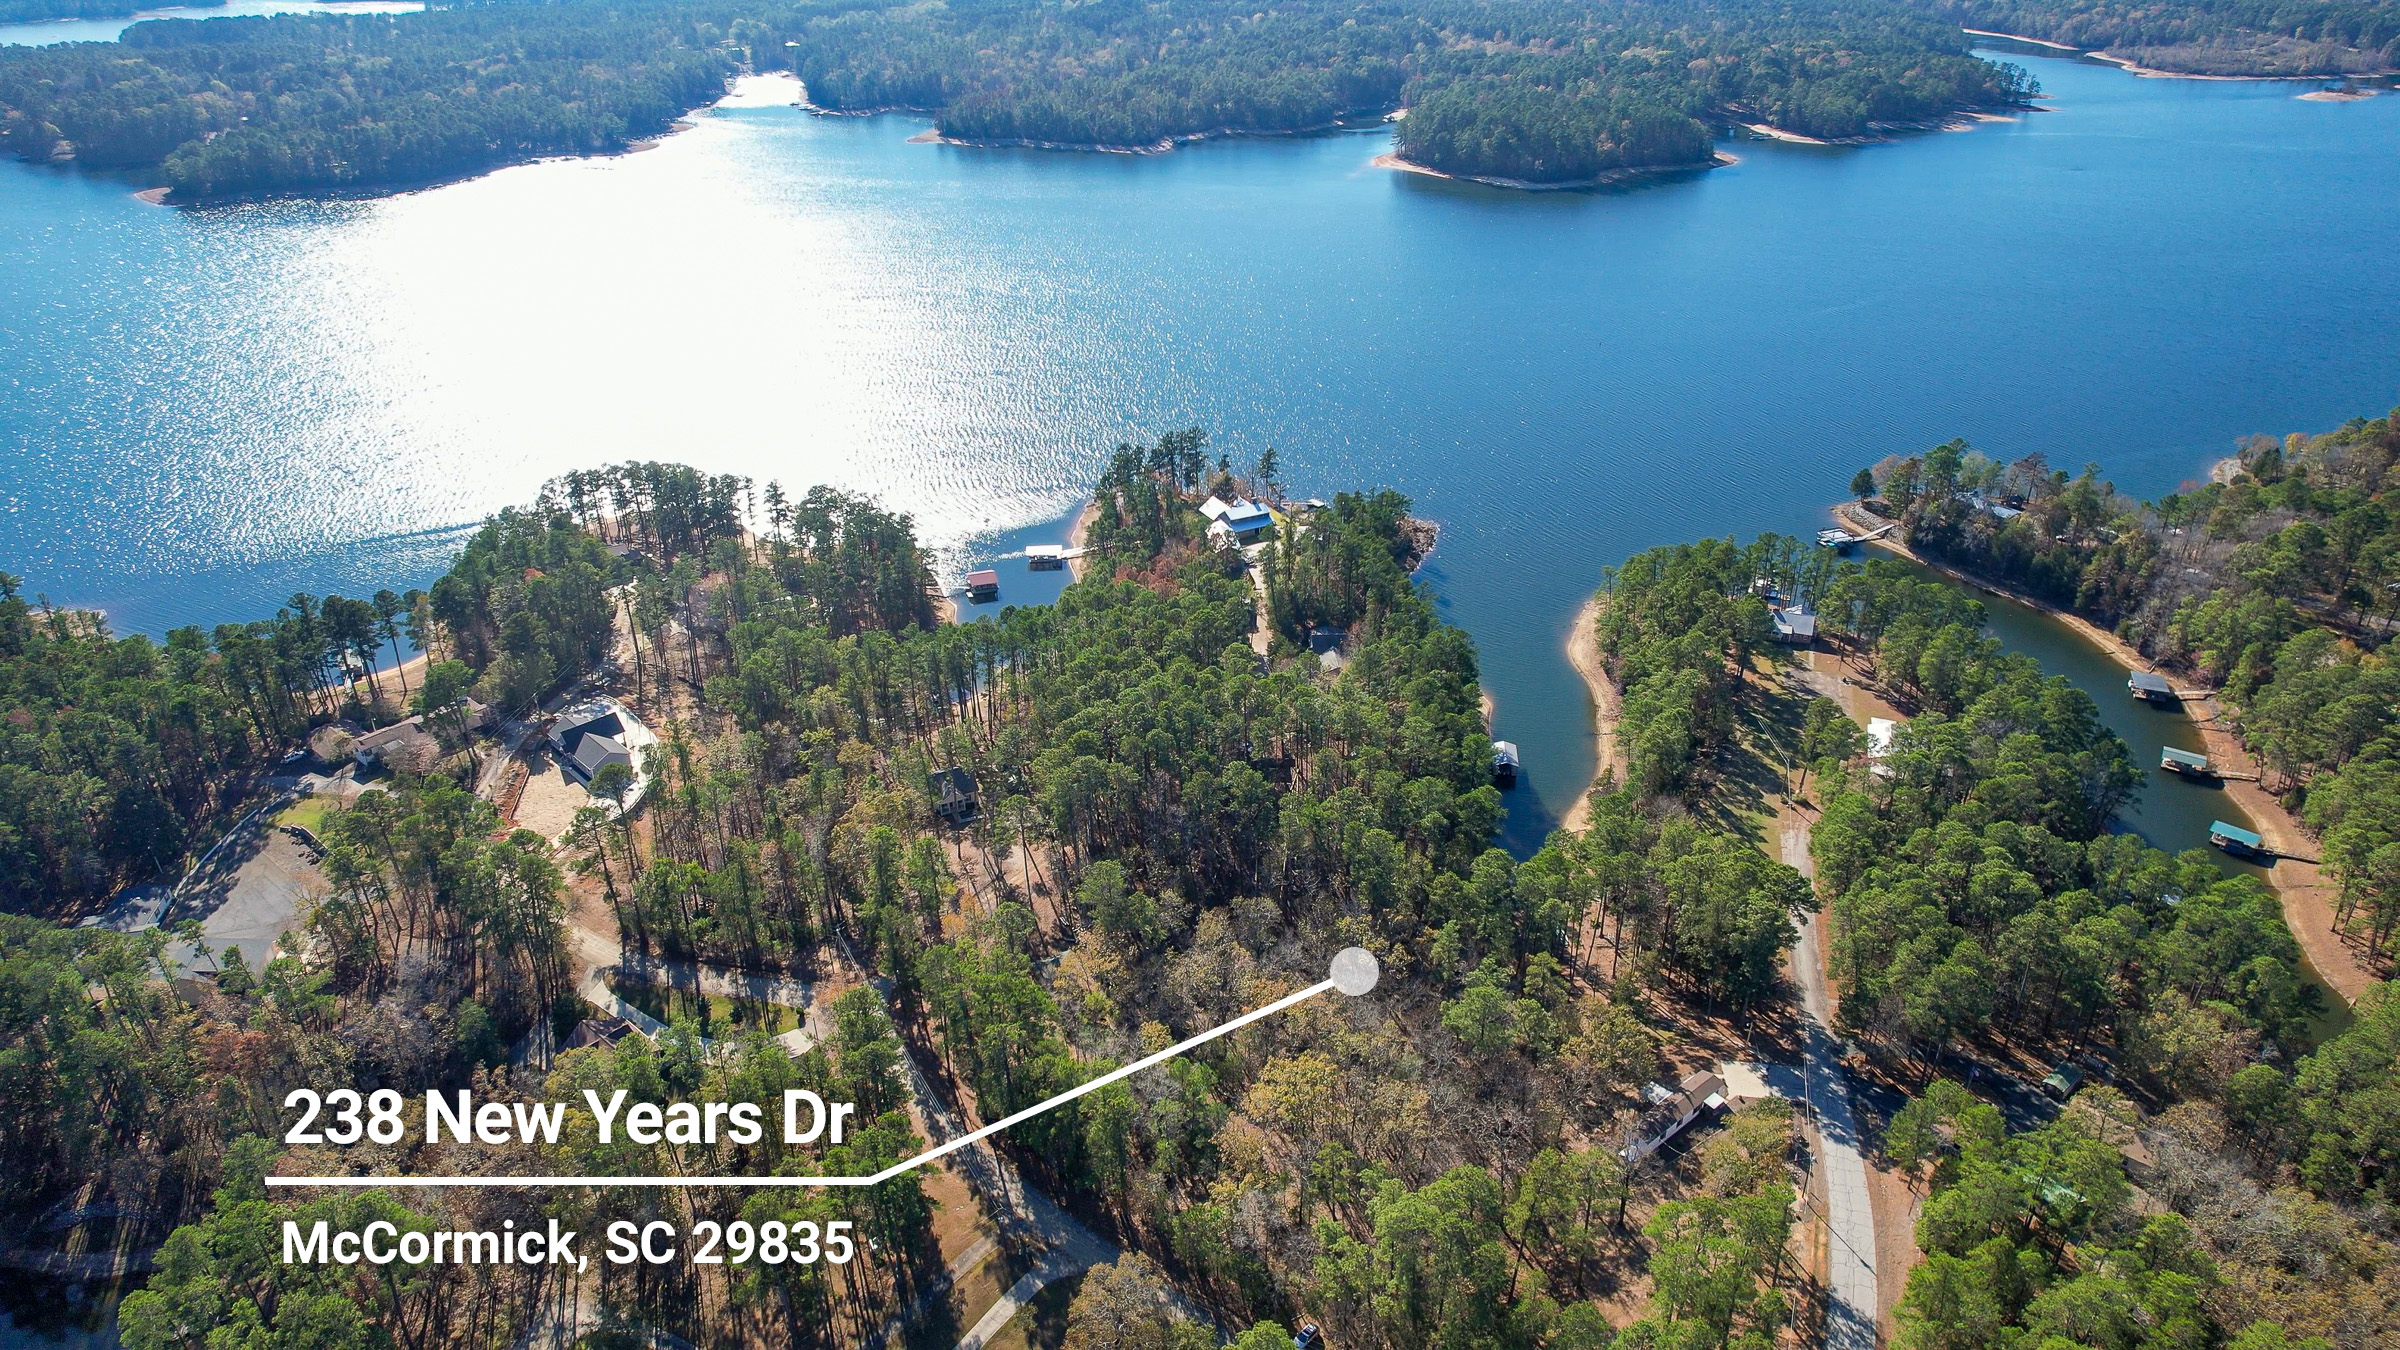 238 New Years Dr, McCormick, SC 29835